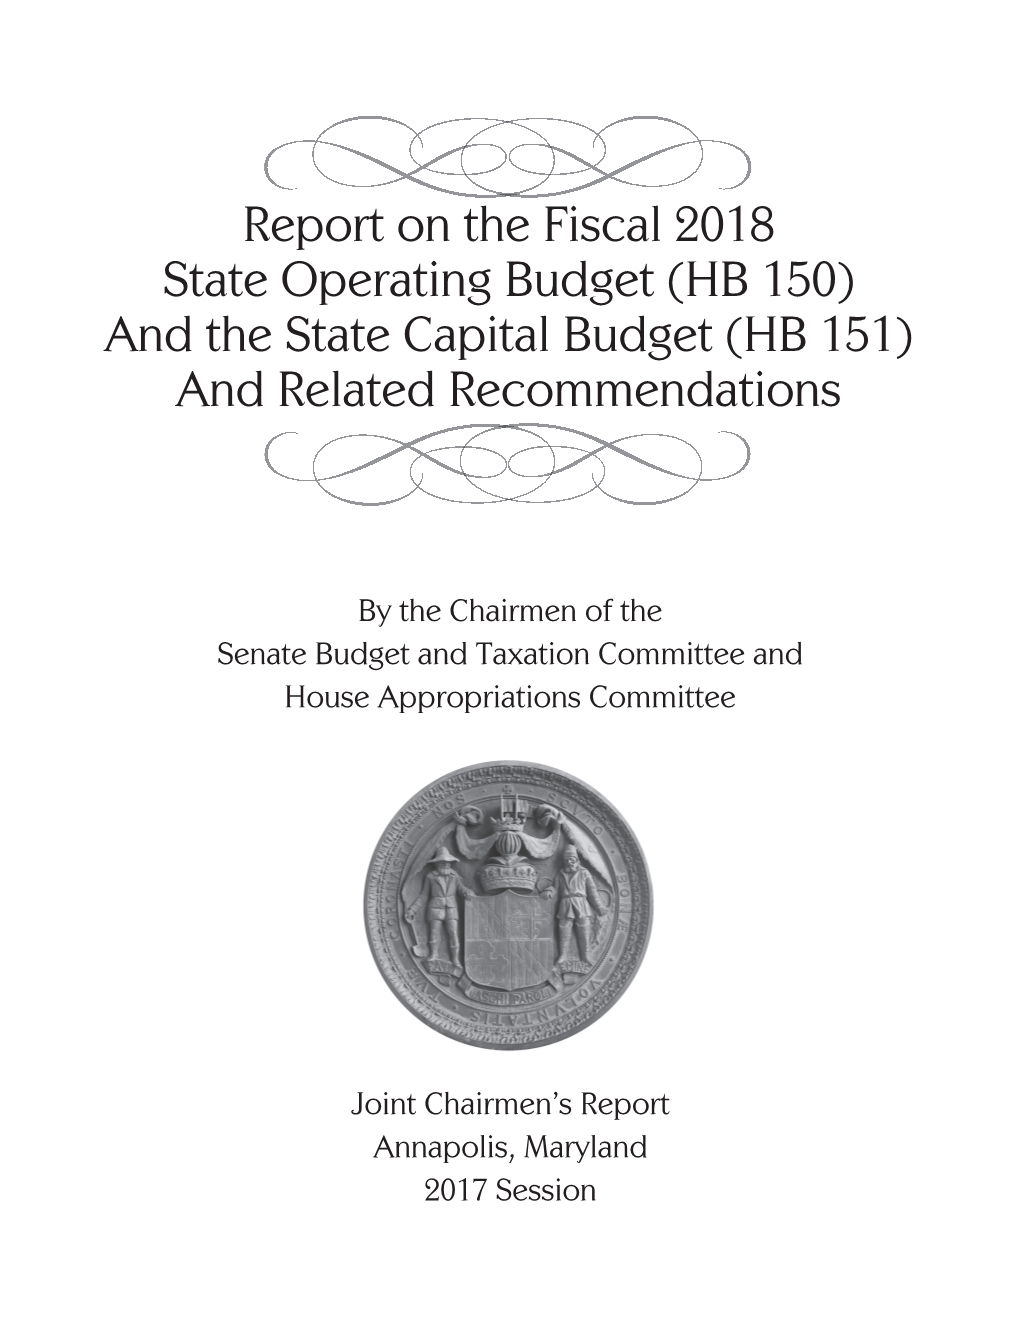 Report on the Fiscal 2018 State Operating Budget (HB 150) and the State Capital Budget (HB 151) and Related Recommendations